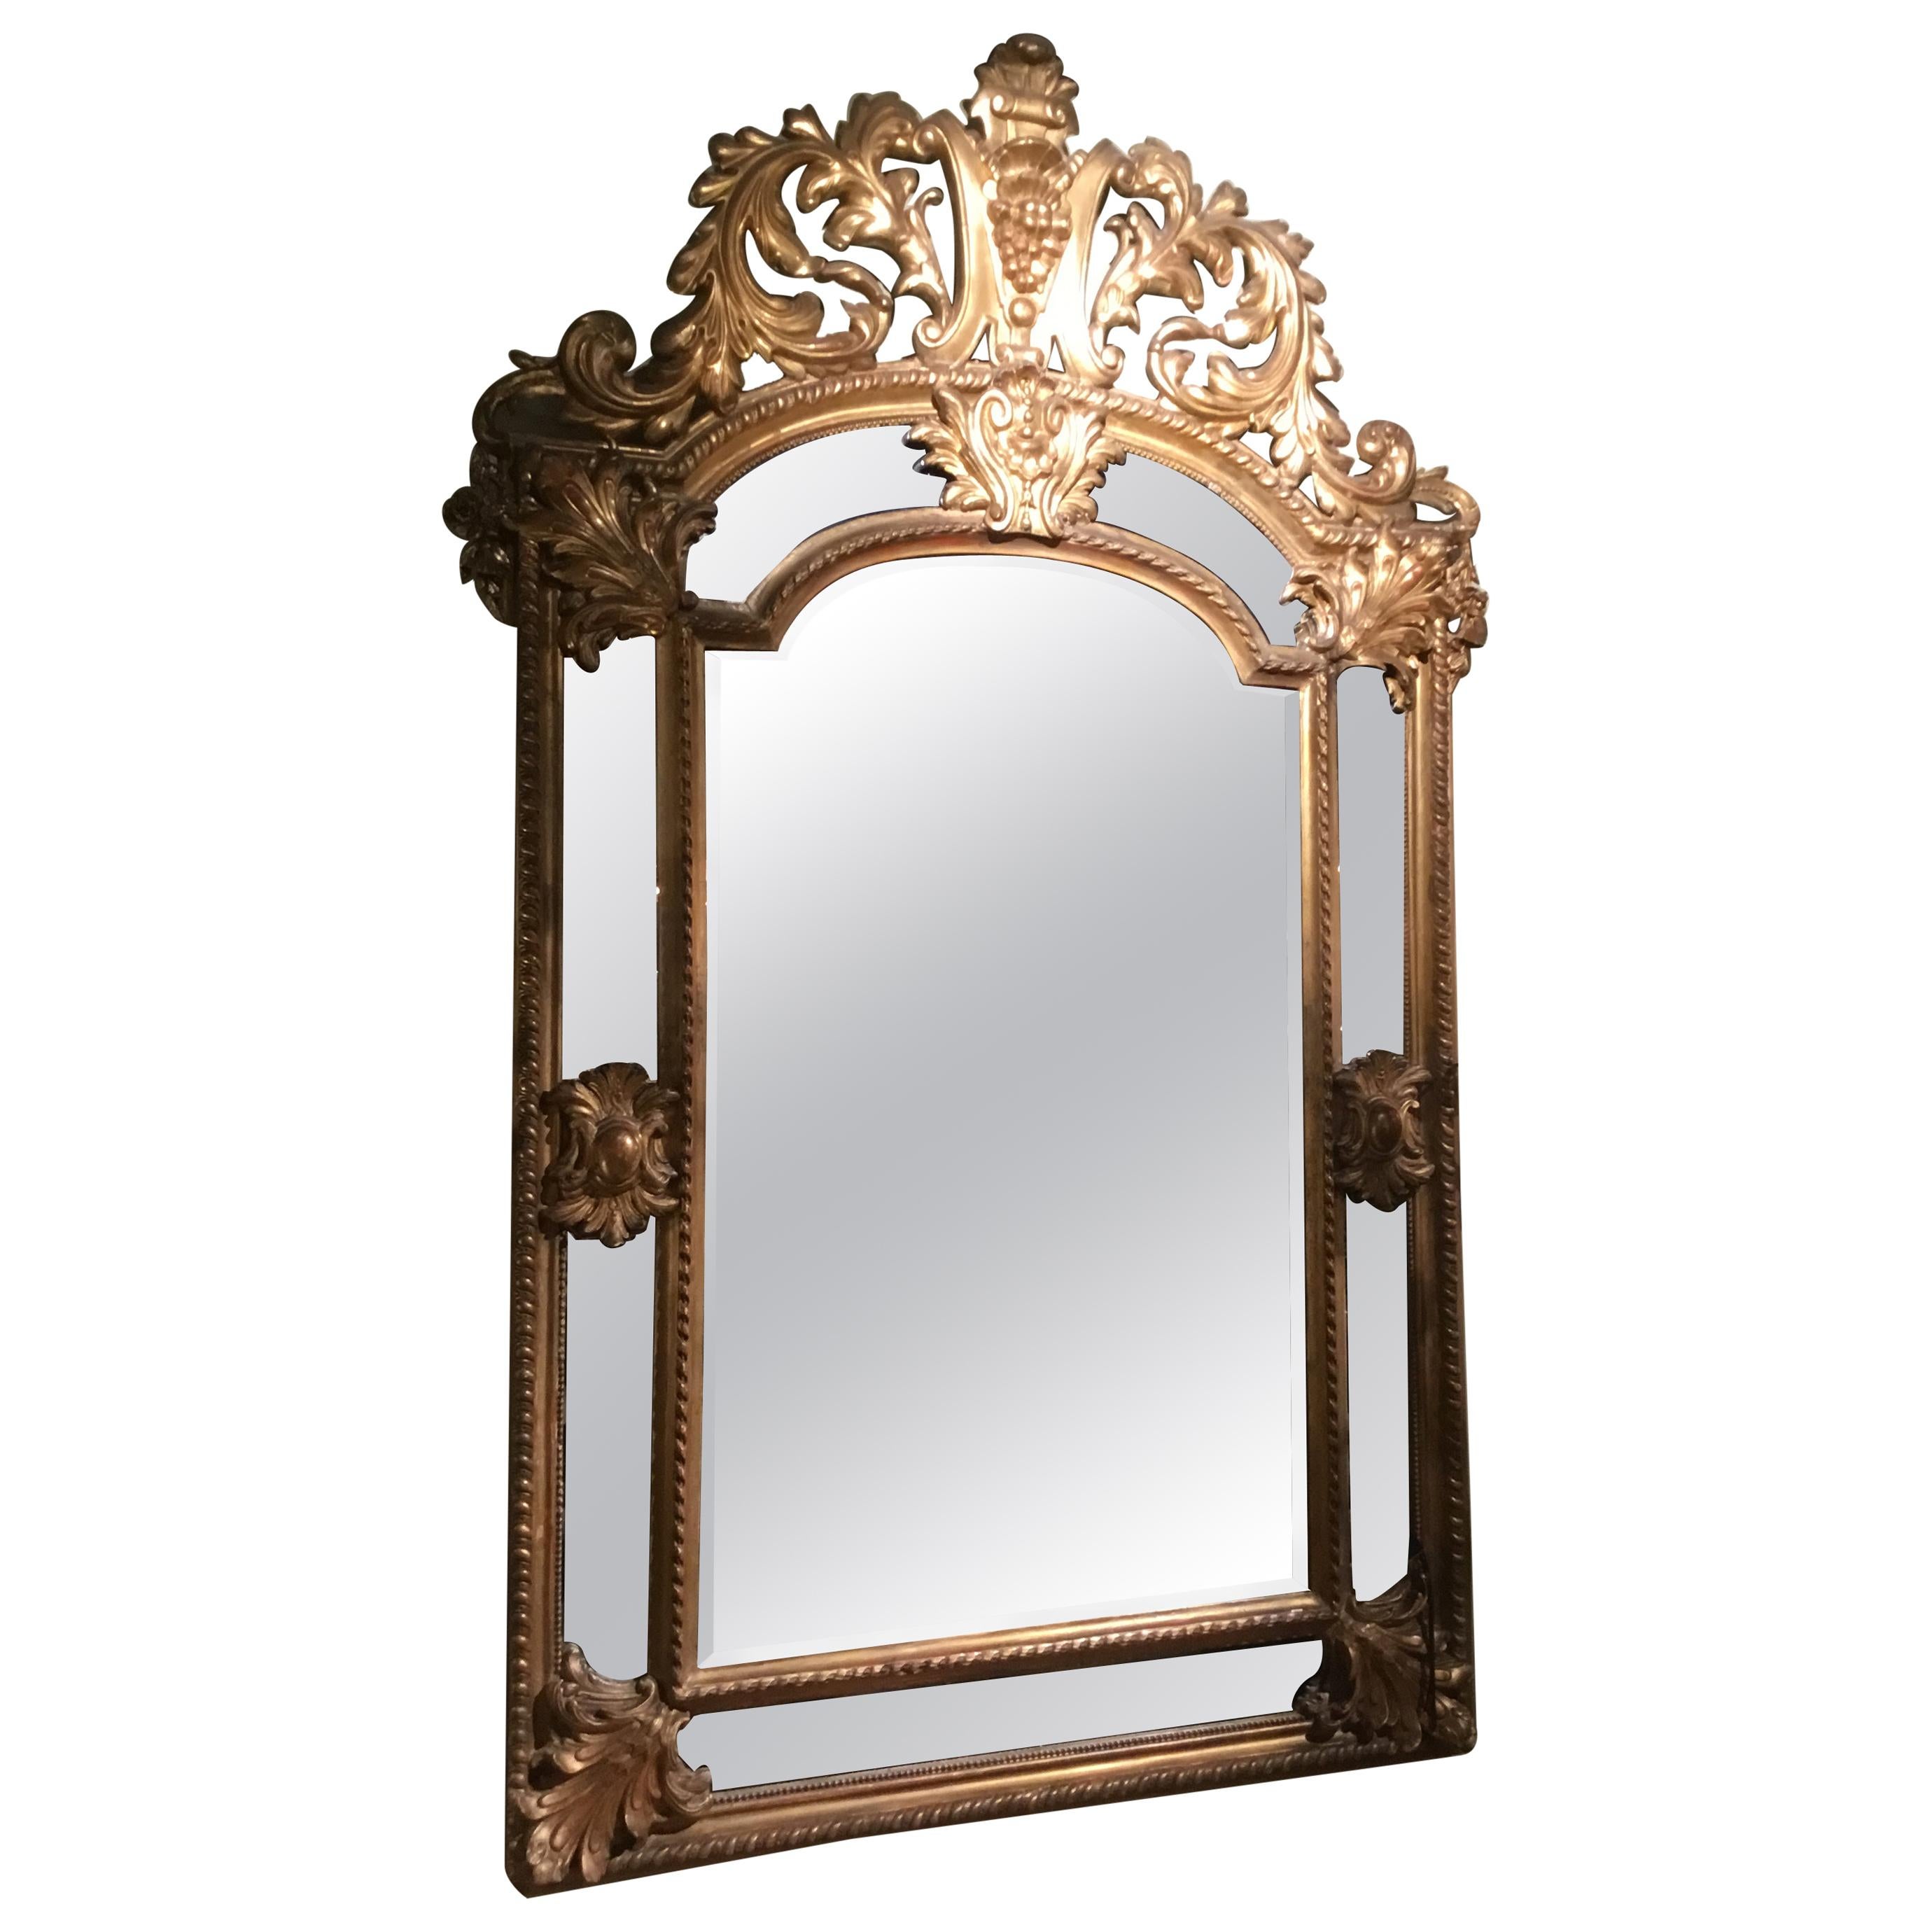 Palace Size Giltwood Rococo Style Cushion Mirror Beveled with Floral Designs For Sale